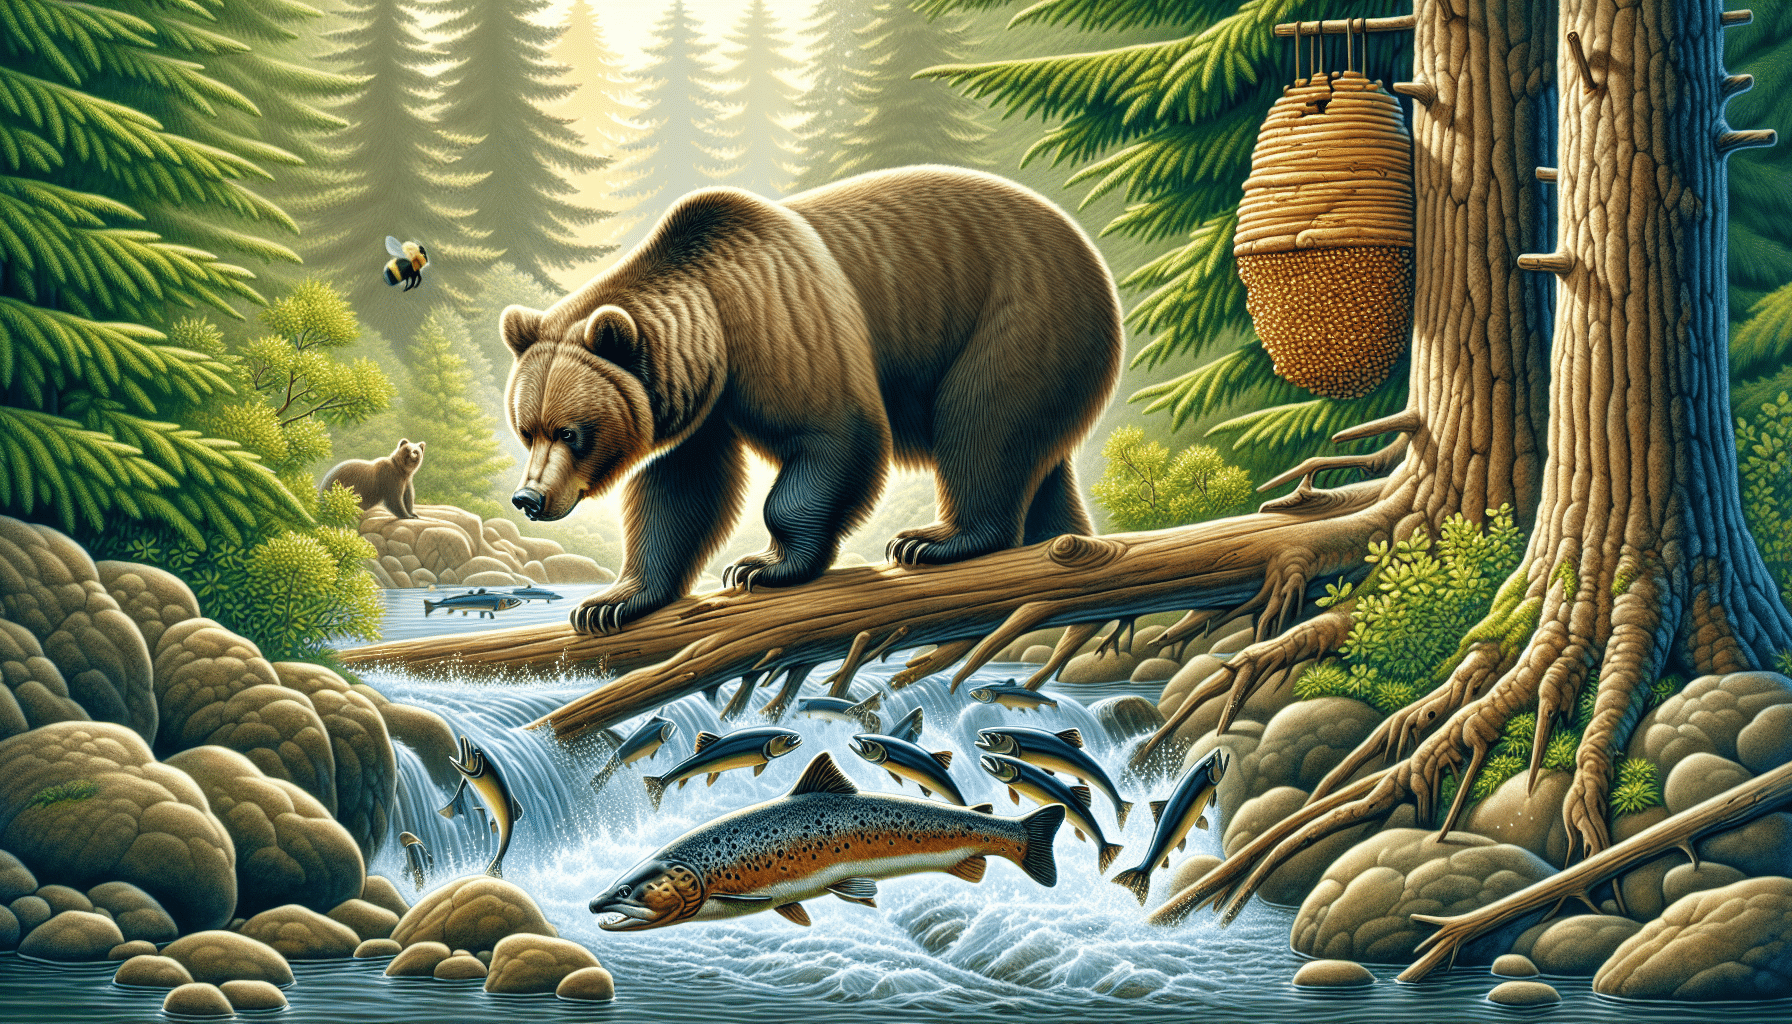 Illustration of a realistic adult brown bear in its natural forested habitat. The bear is seen in action, showing its hunting behavior. Nearby, it scents a school of salmon in a stream, with fish visibly leaping from the water. In the background, a beehive hangs from a tree branch, hinting at another food source. Please do not portray any humans, text, brand names, or logos in the image.